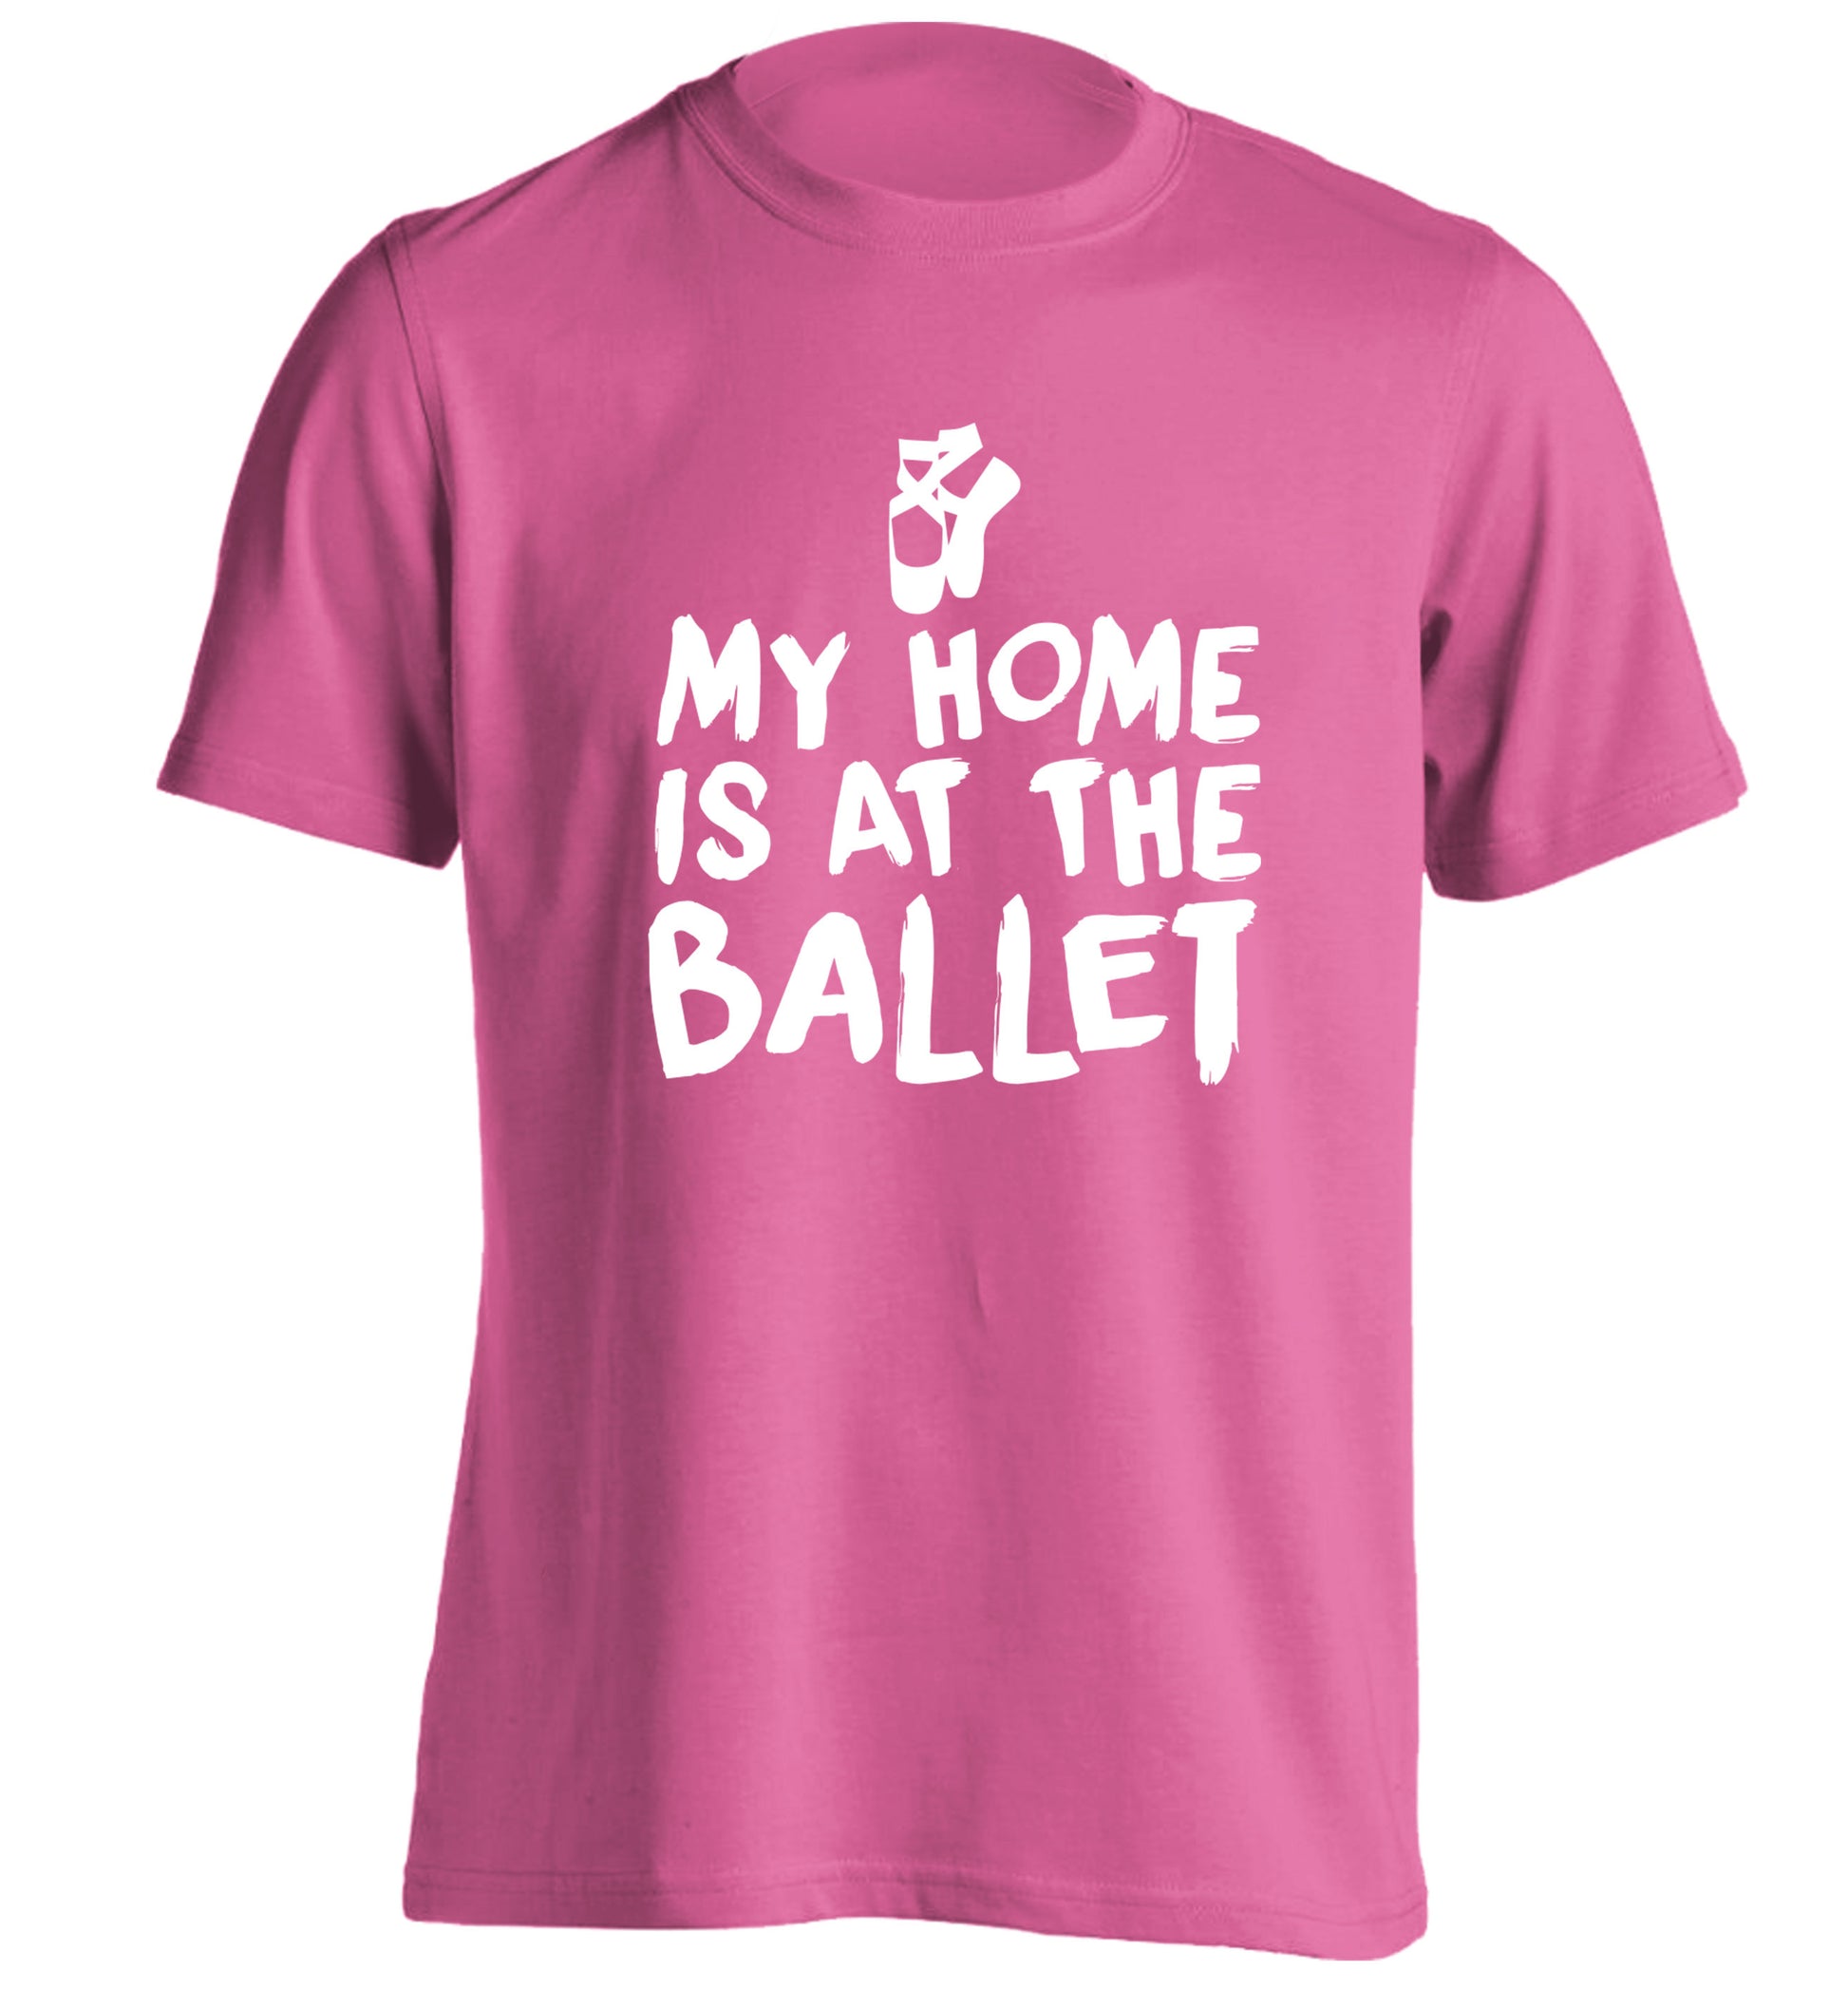 My home is at the dance studio adults unisex pink Tshirt 2XL